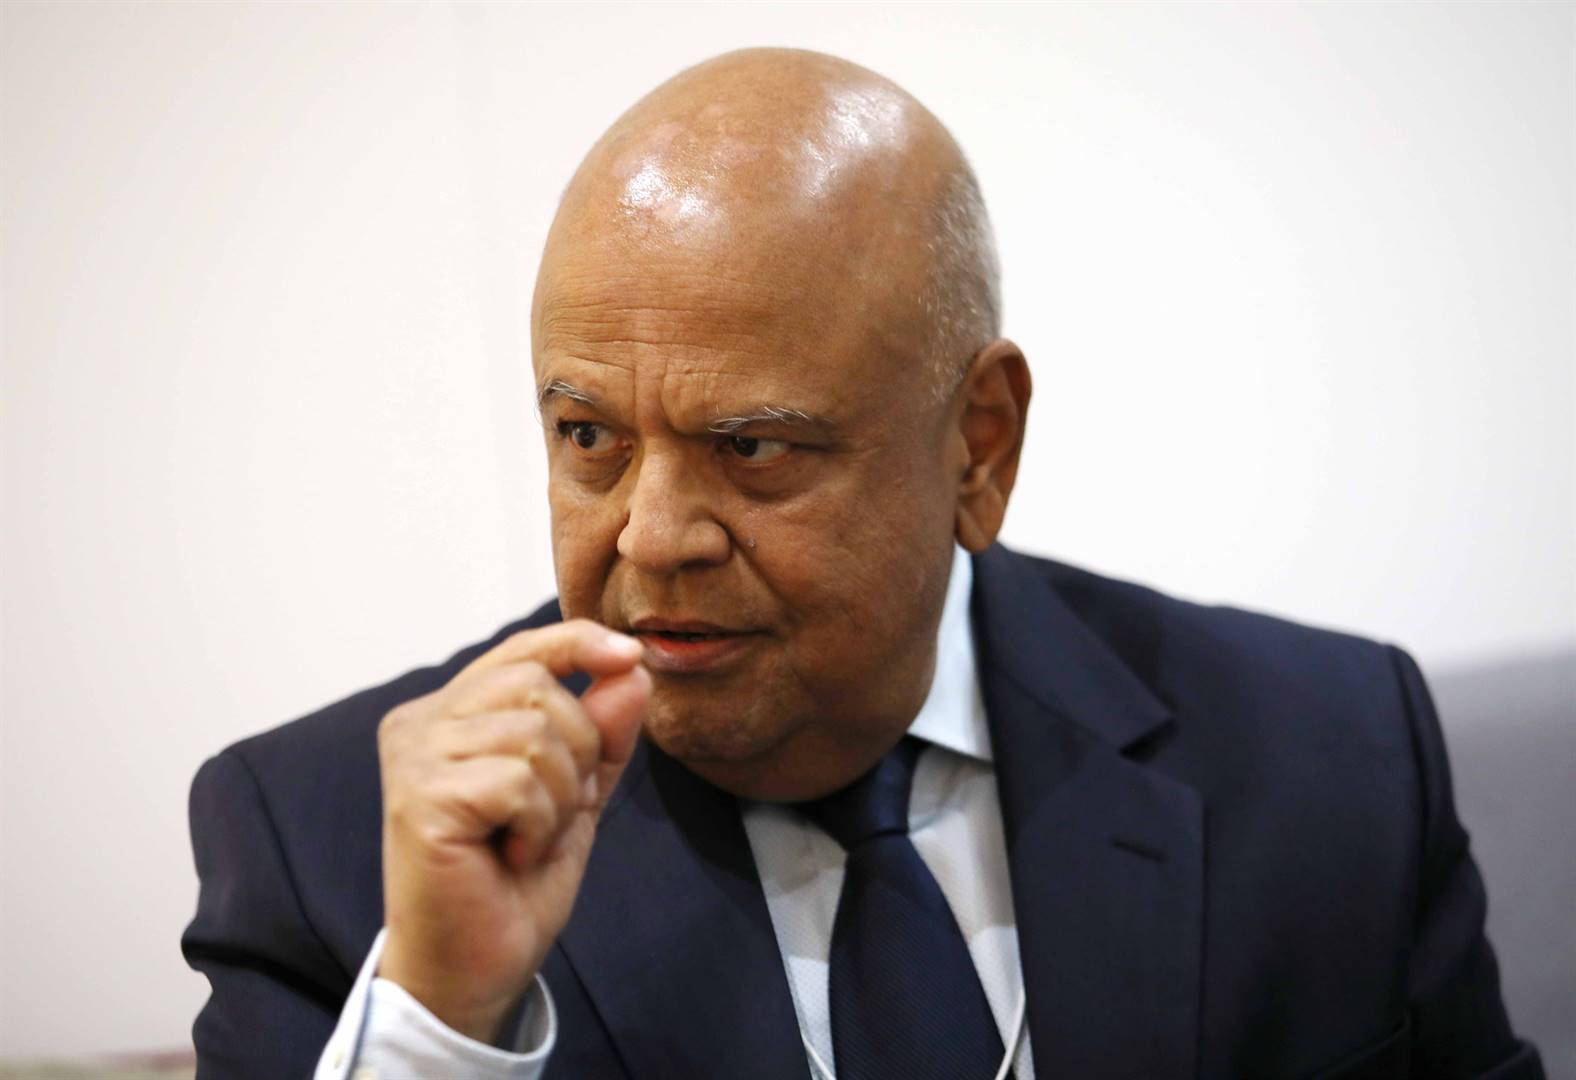 Public Enterprises Minister Pravin Gordhan on Wednesday was at loggerheads with the committee over his insistence that the SAA/Takatso sale documents should only be shared with MPs in camera